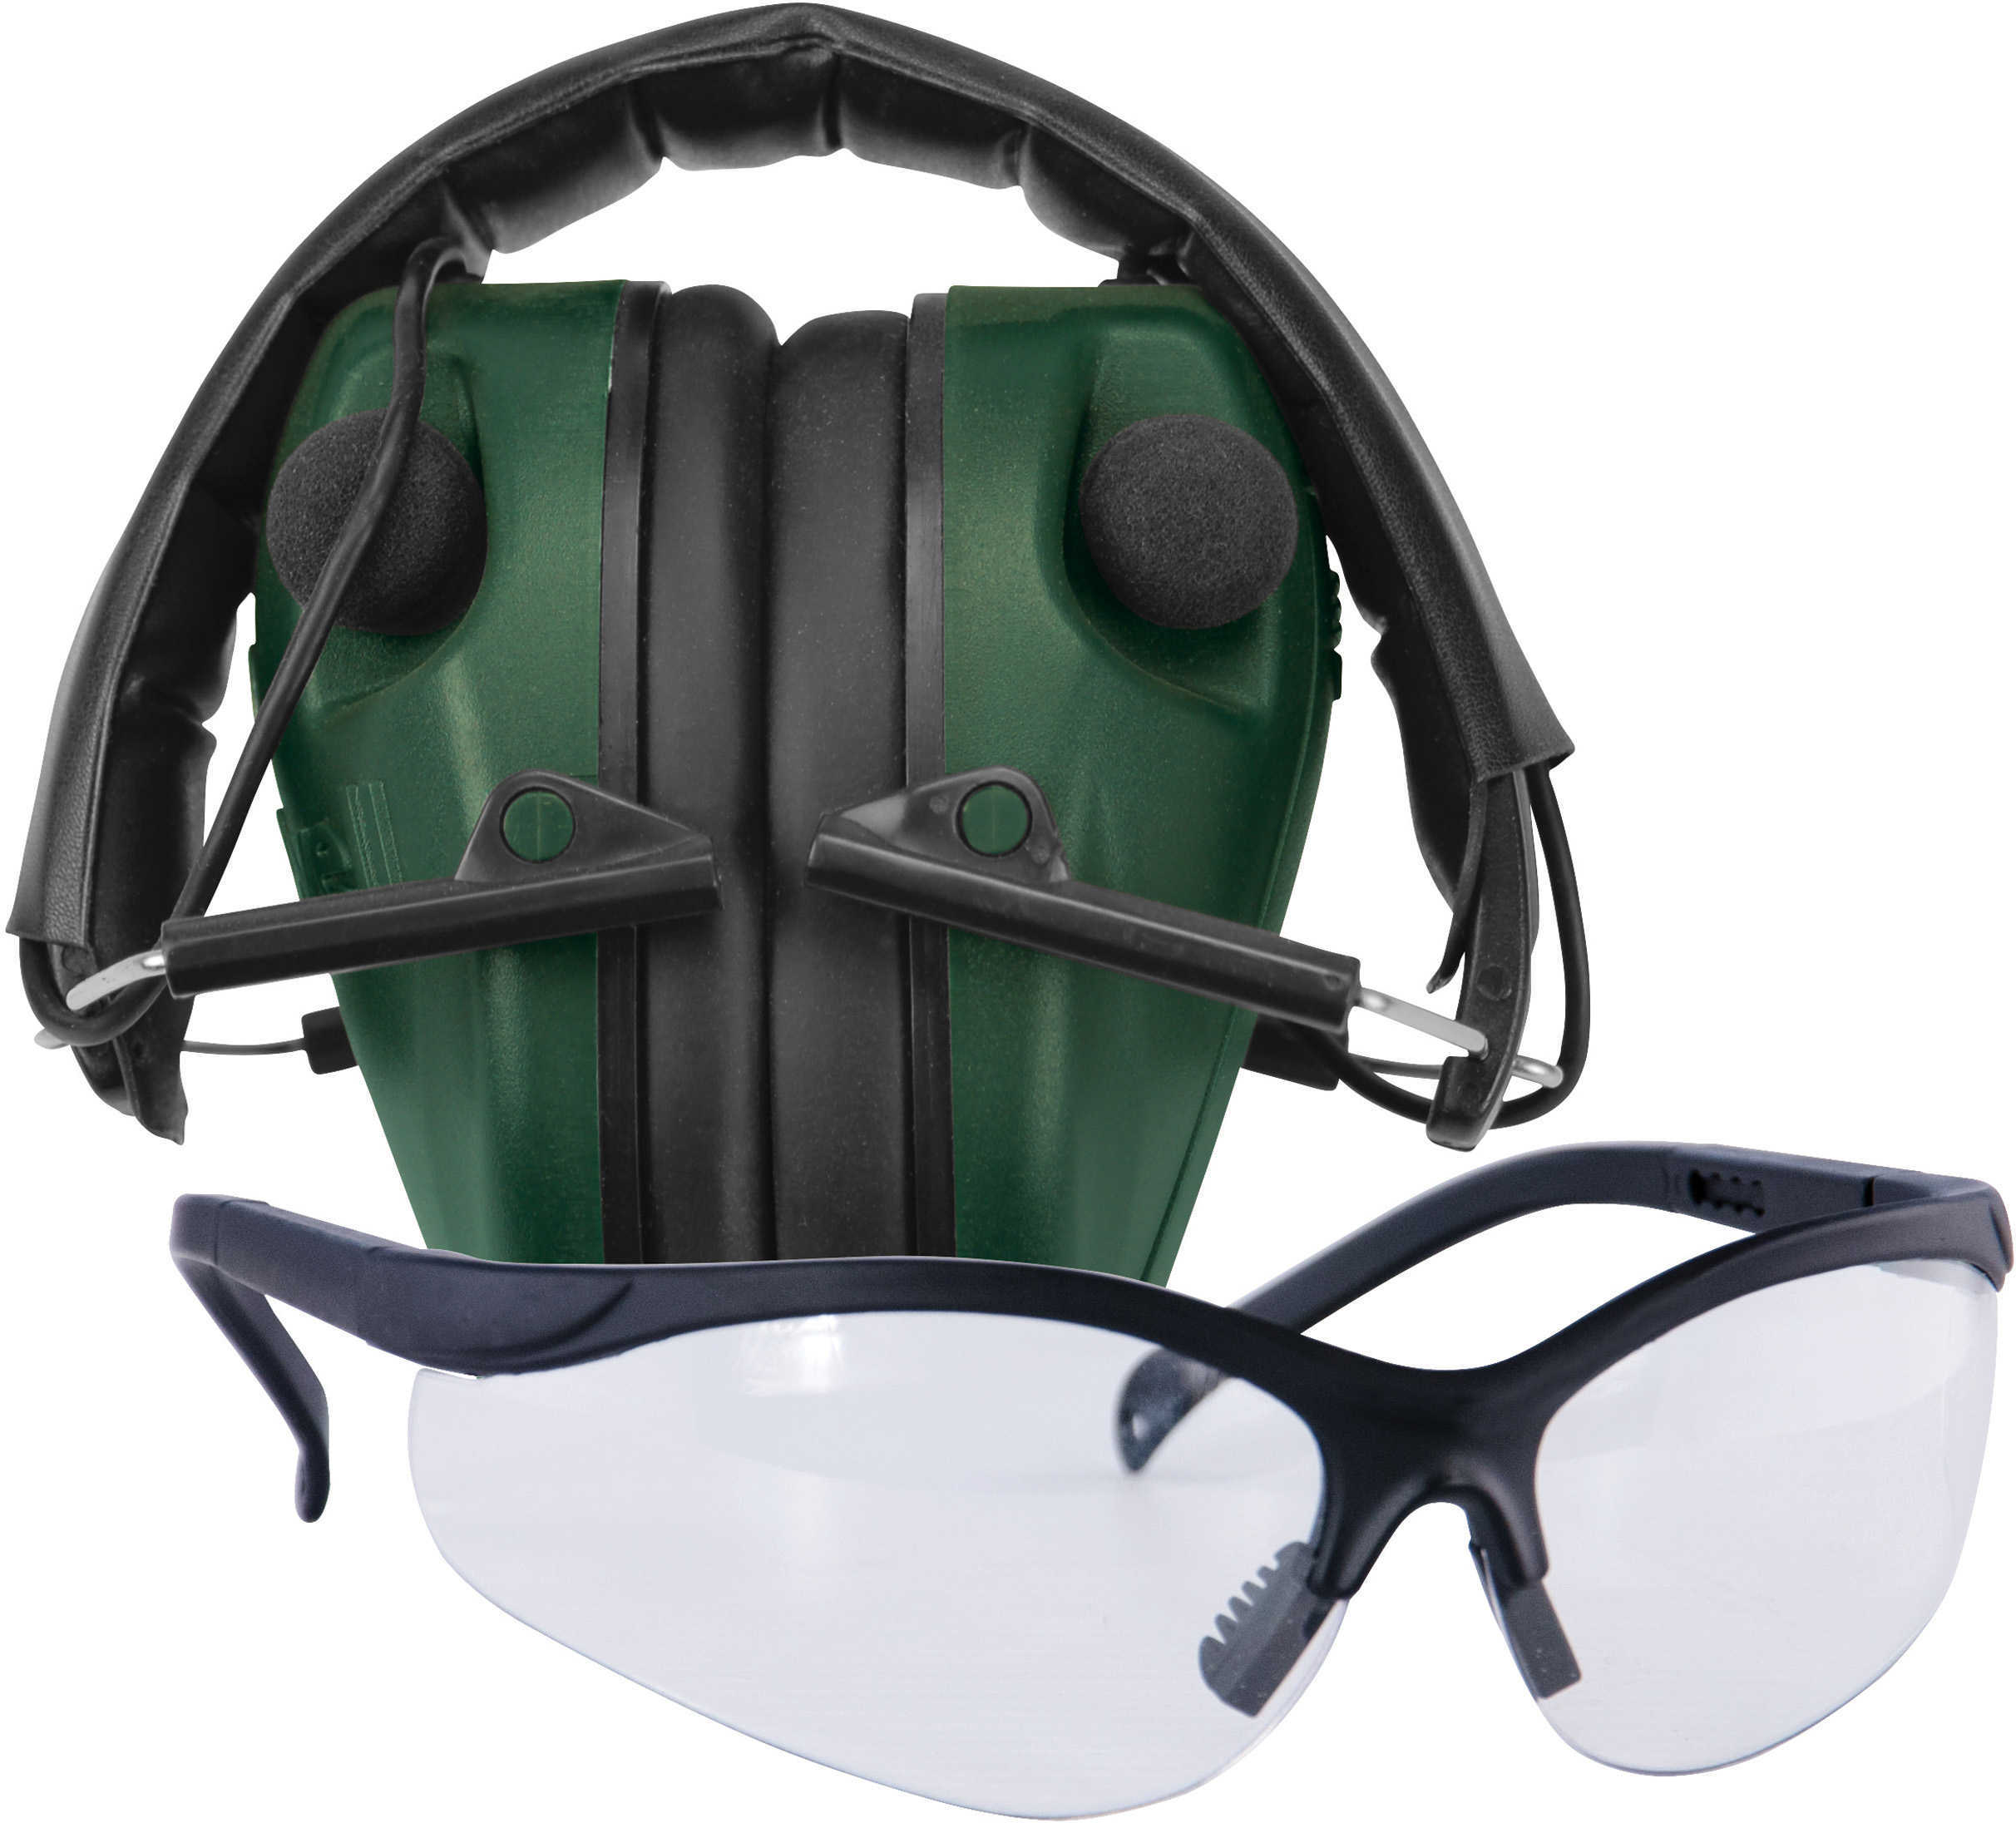 Caldwell E-Max Electronic Hearing Protection Low Profile w/Shooting Glasses Md: 487309